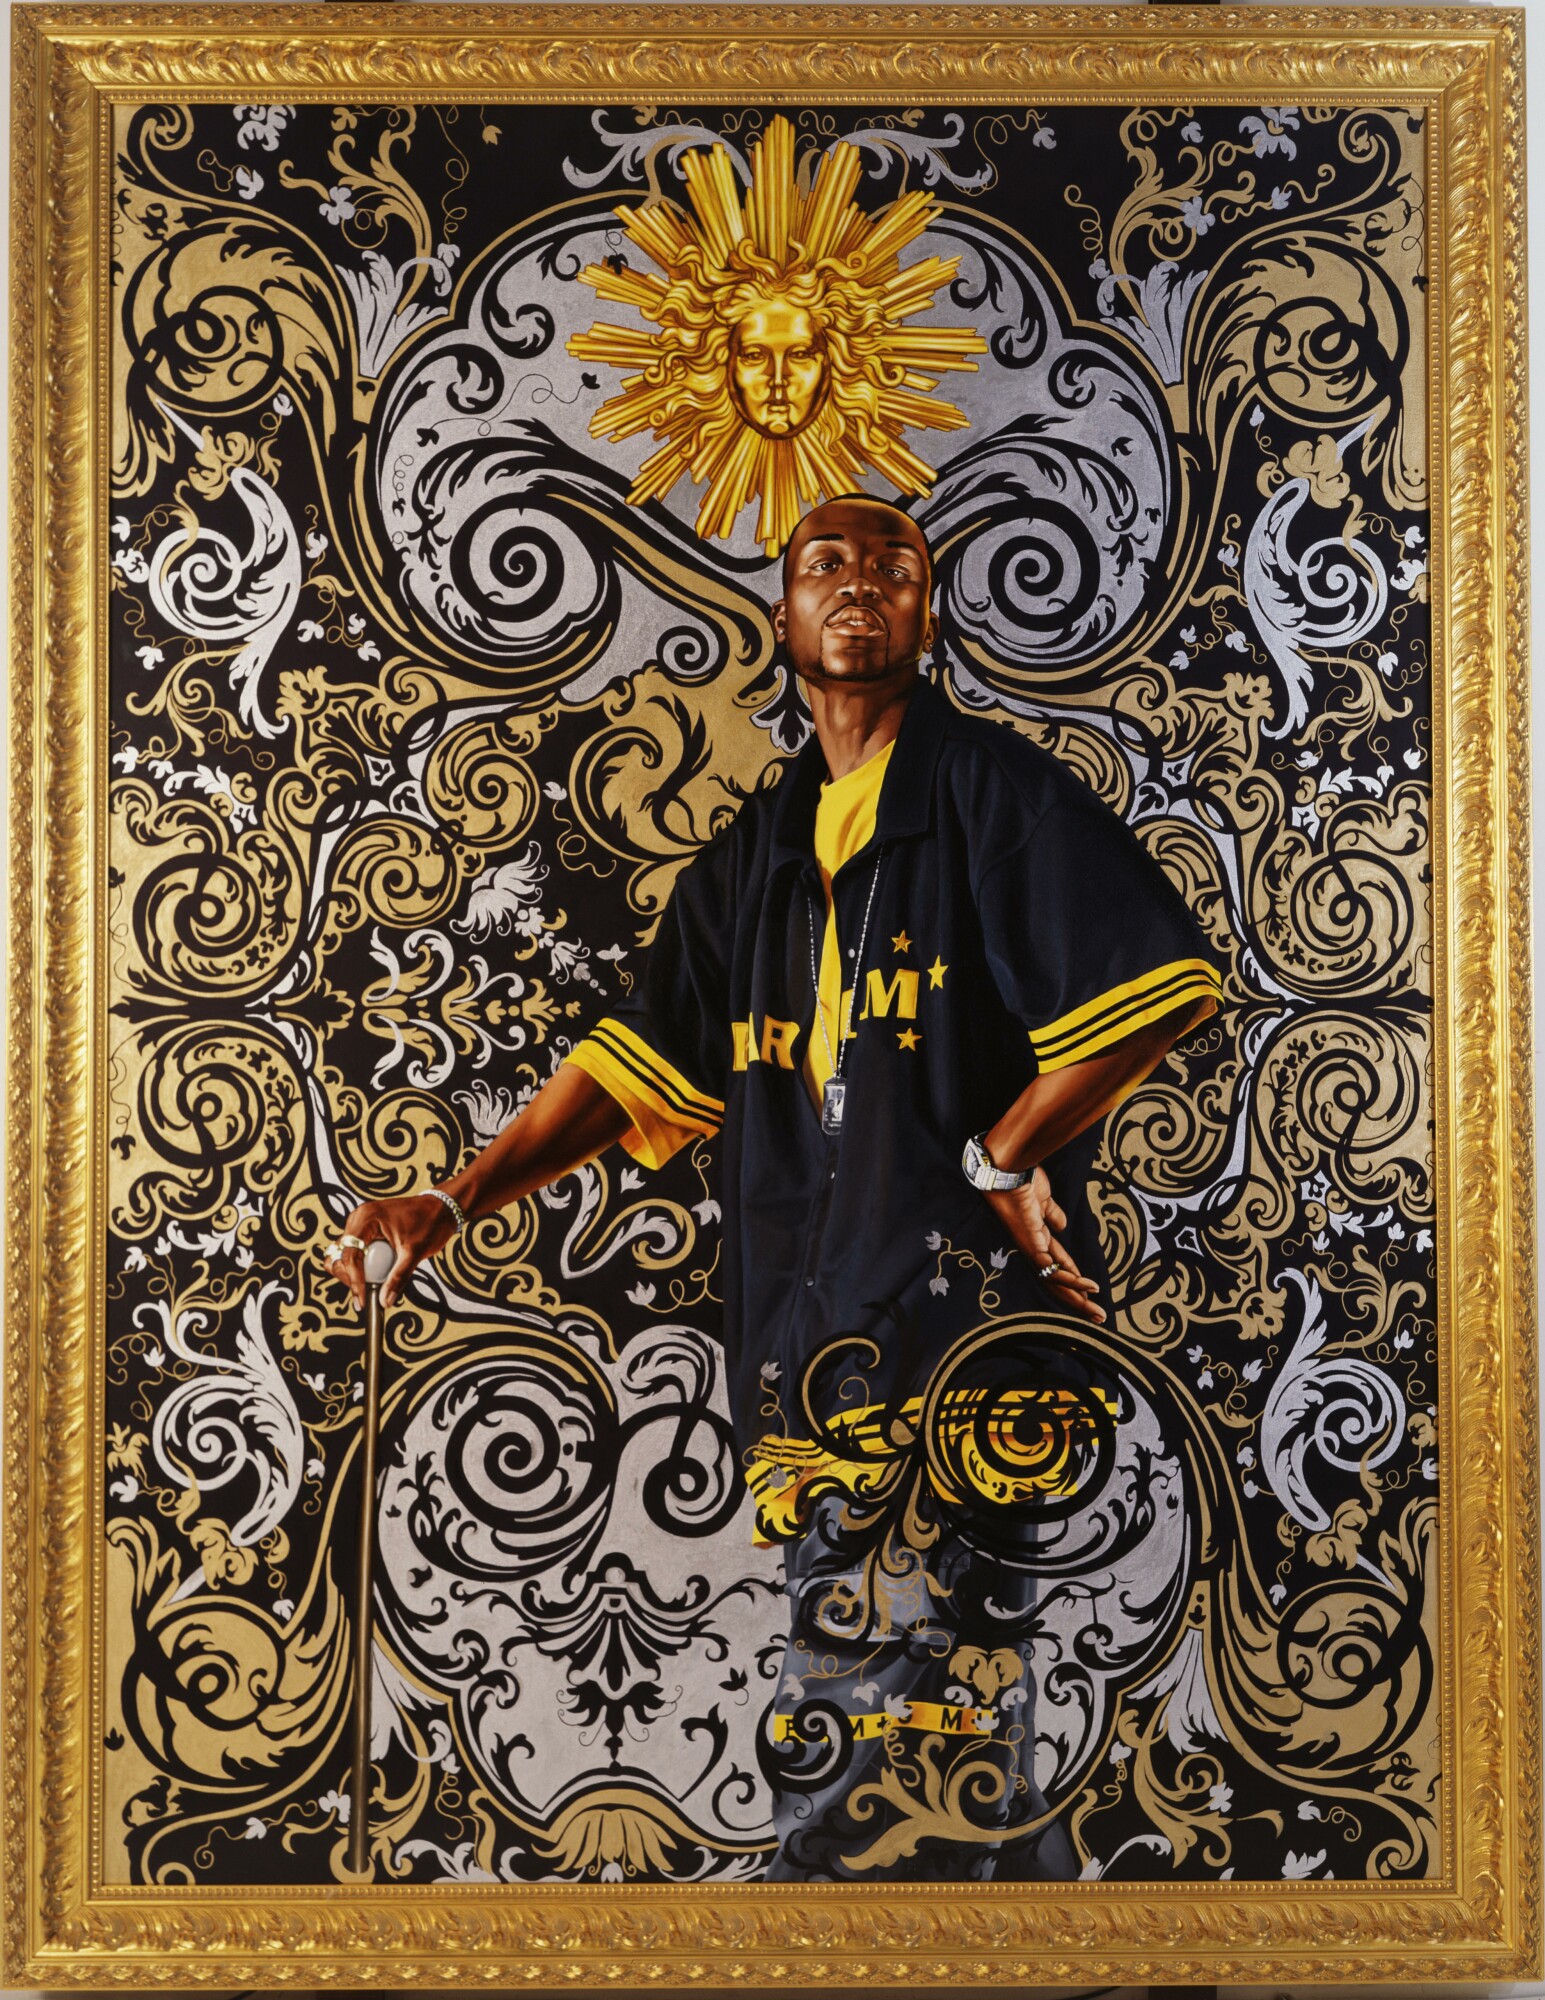 kehindewiley_a new republic_Portrait of Andries Stilte